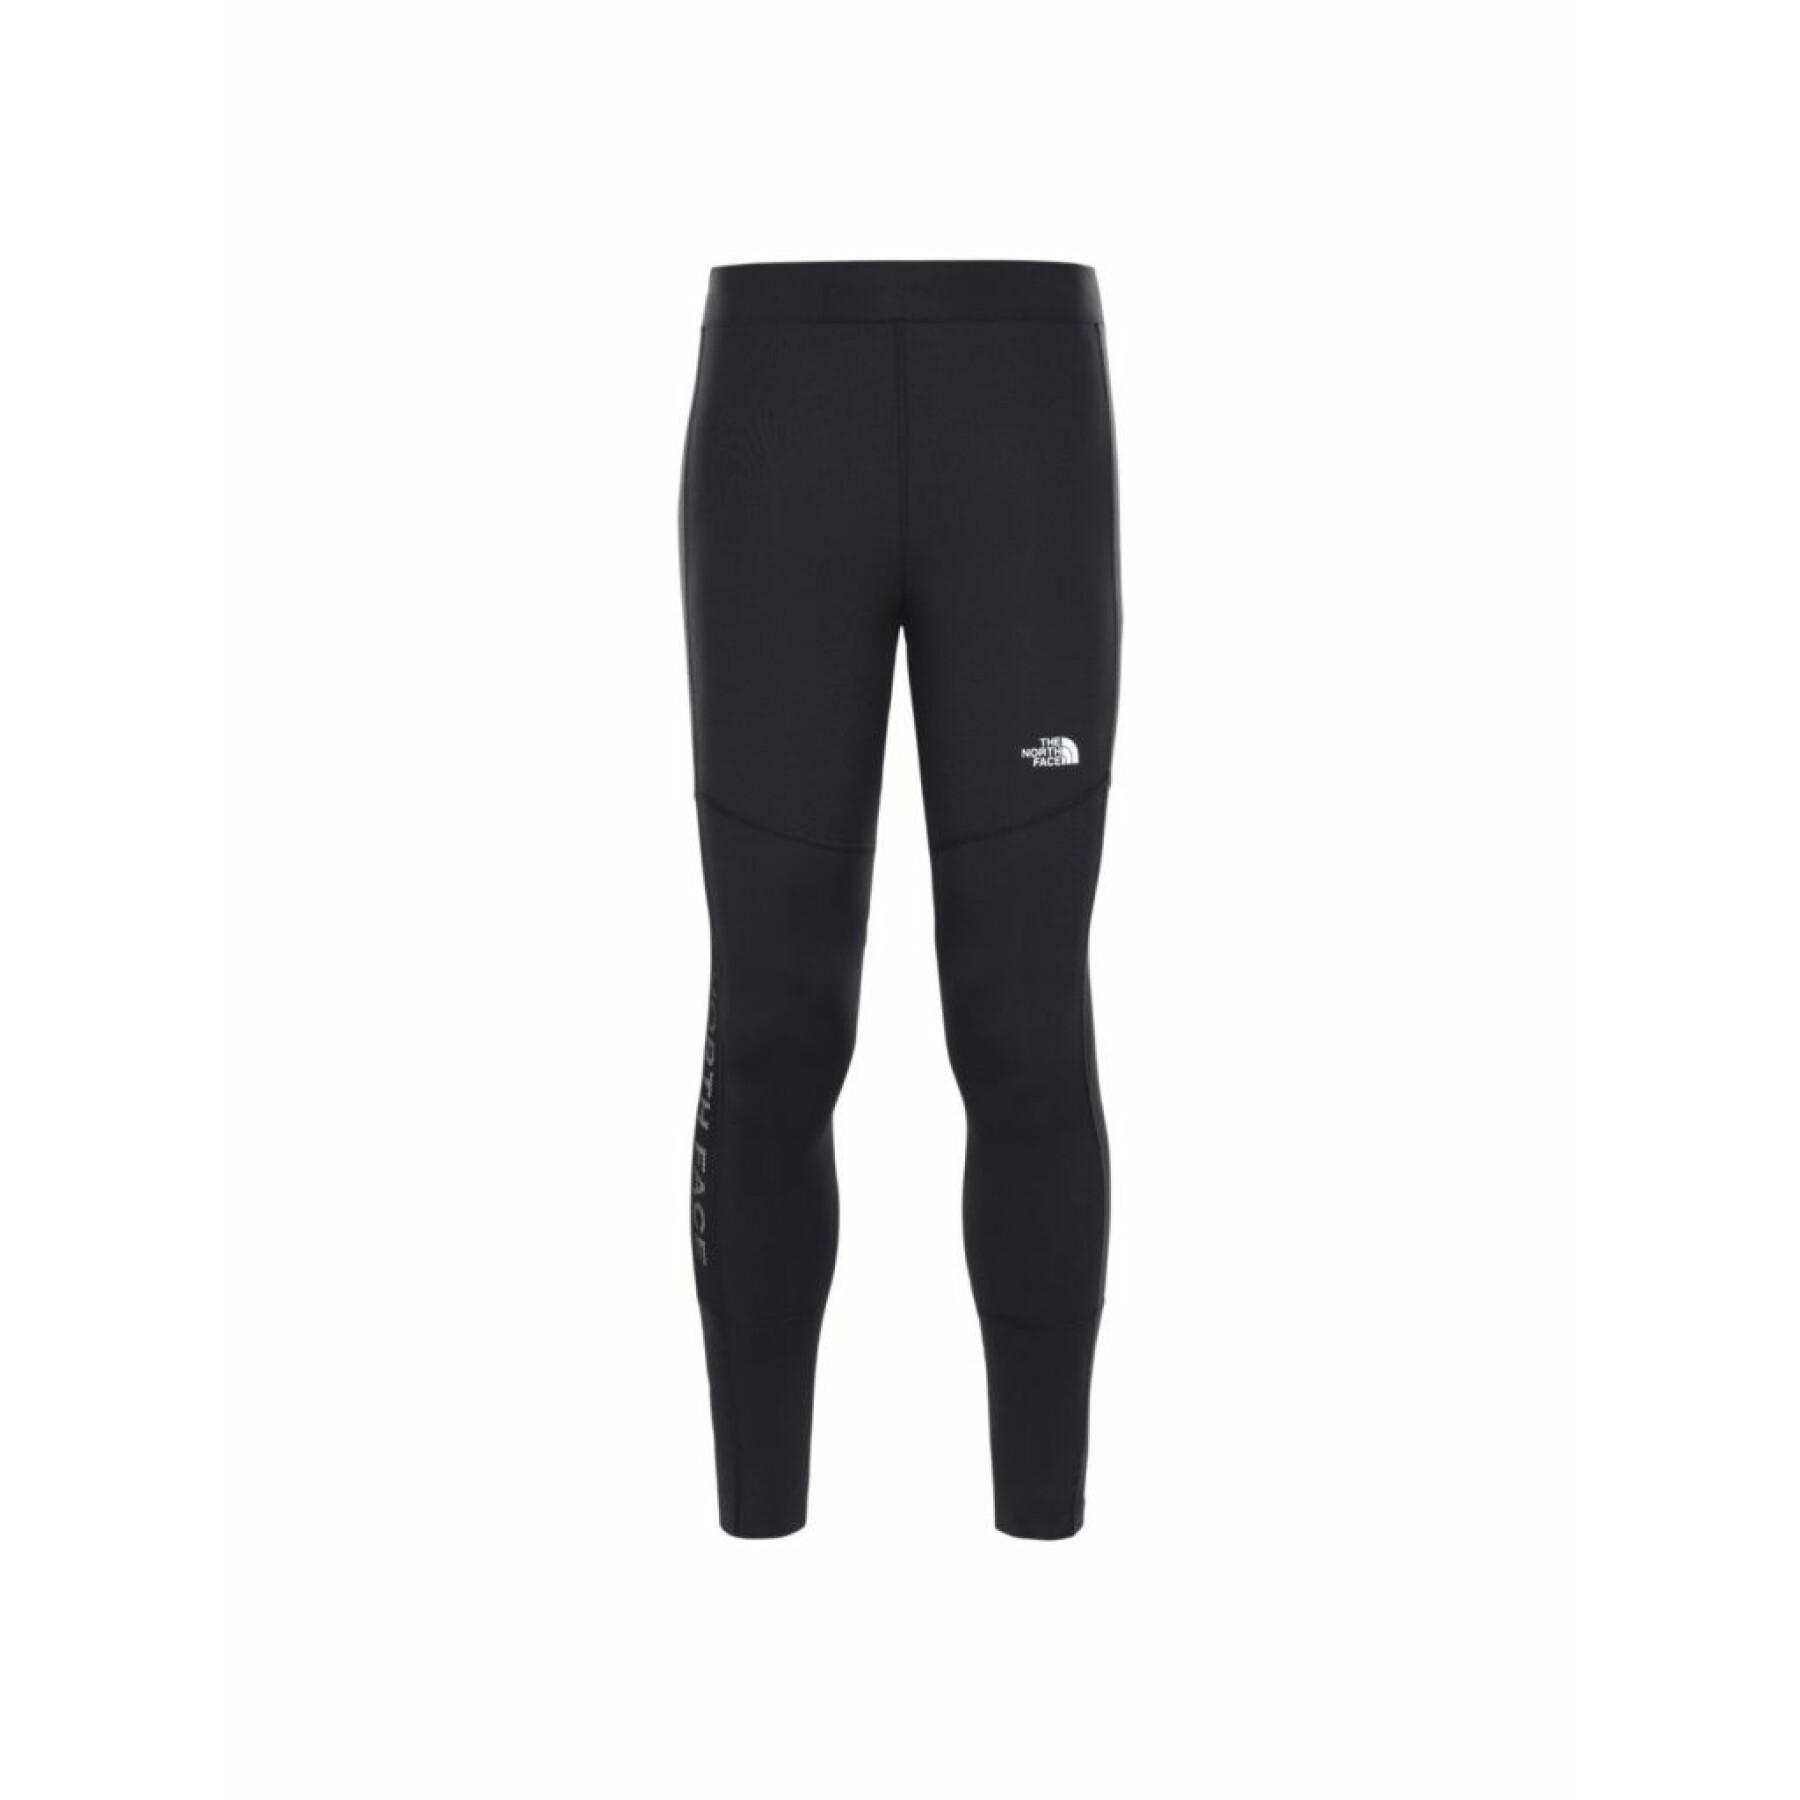 Collant femme The North Face Tight